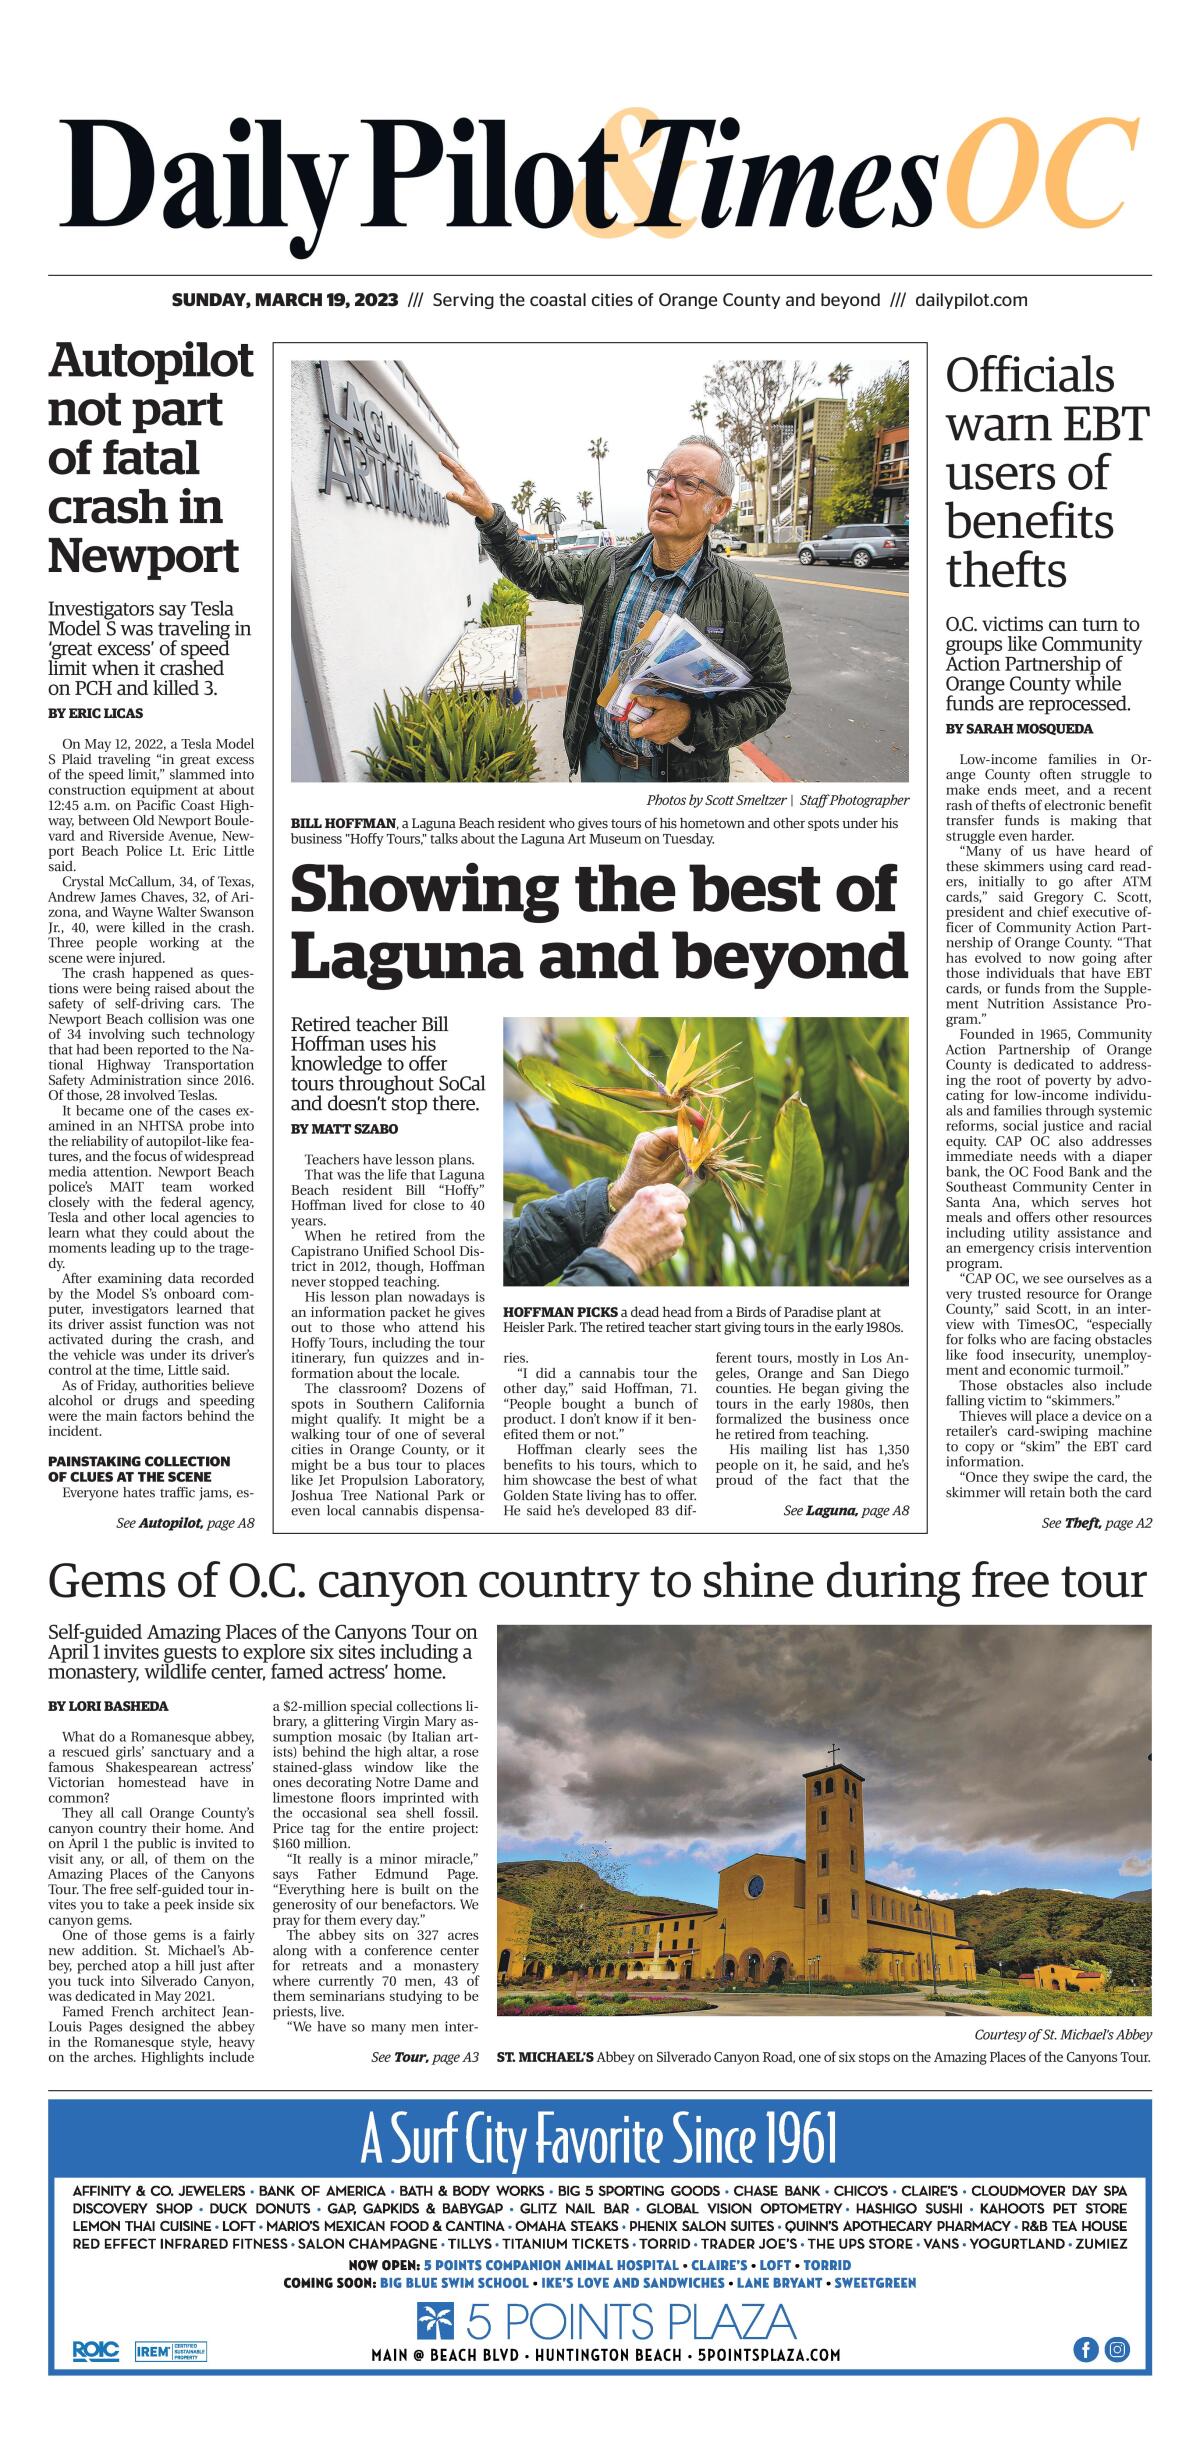 Daily Pilot e-newspaper: Sunday, March 19, 2023 - Los Angeles Times